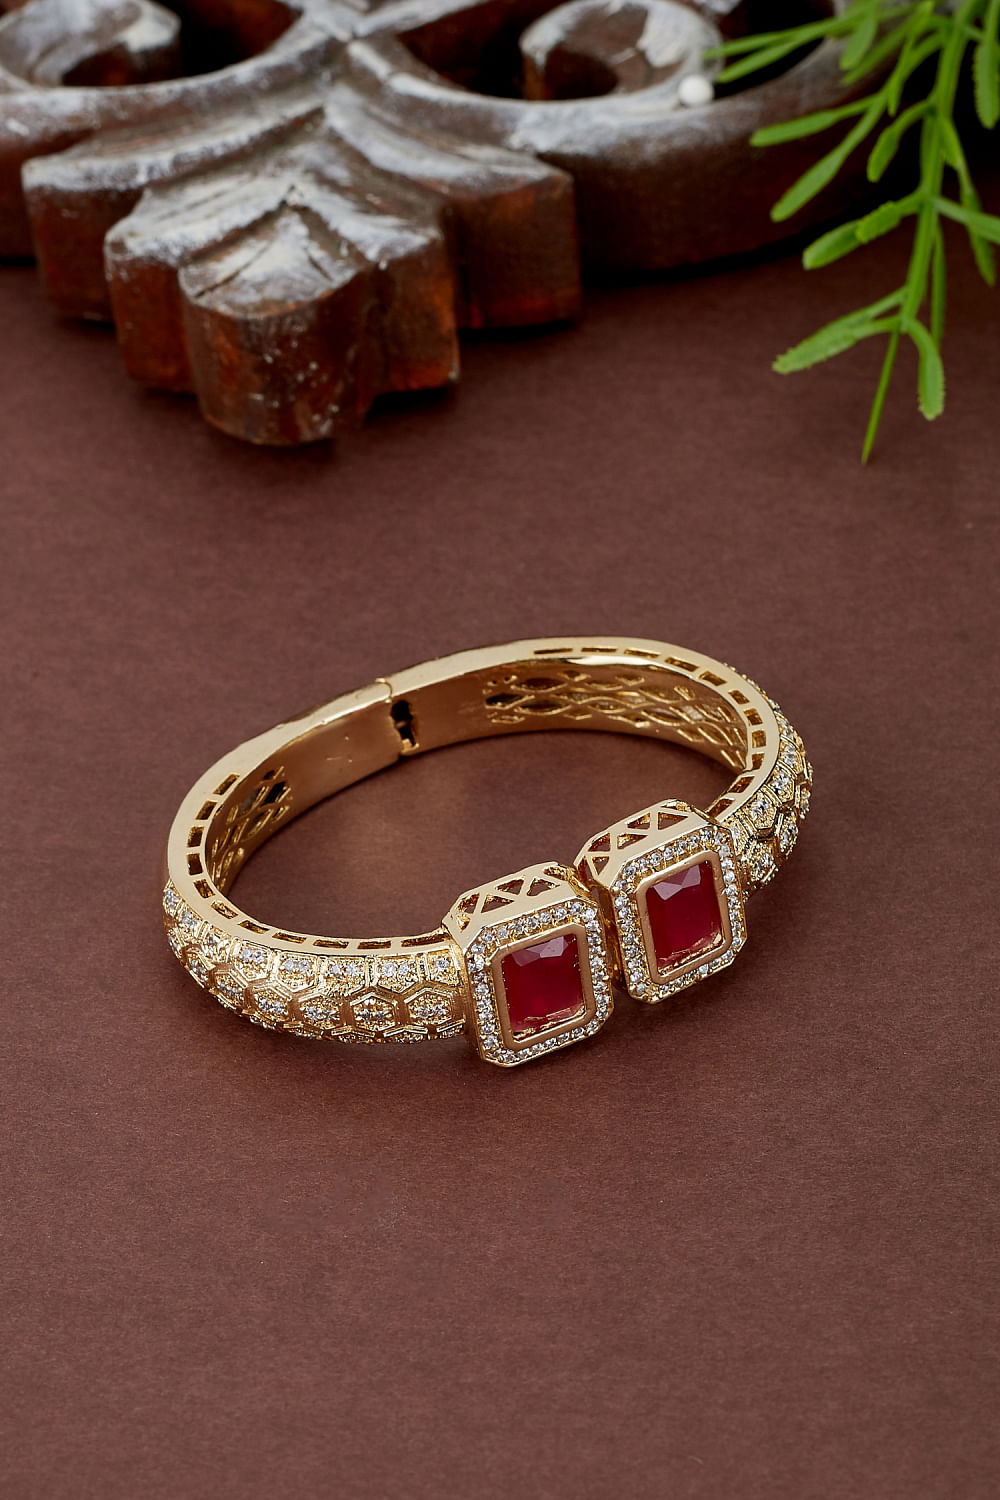 8.20 Ctw Emerald Cut Red Ruby Stone Bracelet for Her, 14k Yellow Gold Over  Wedding /engagement/anniversary Bracelet Gifting for Her. - Etsy